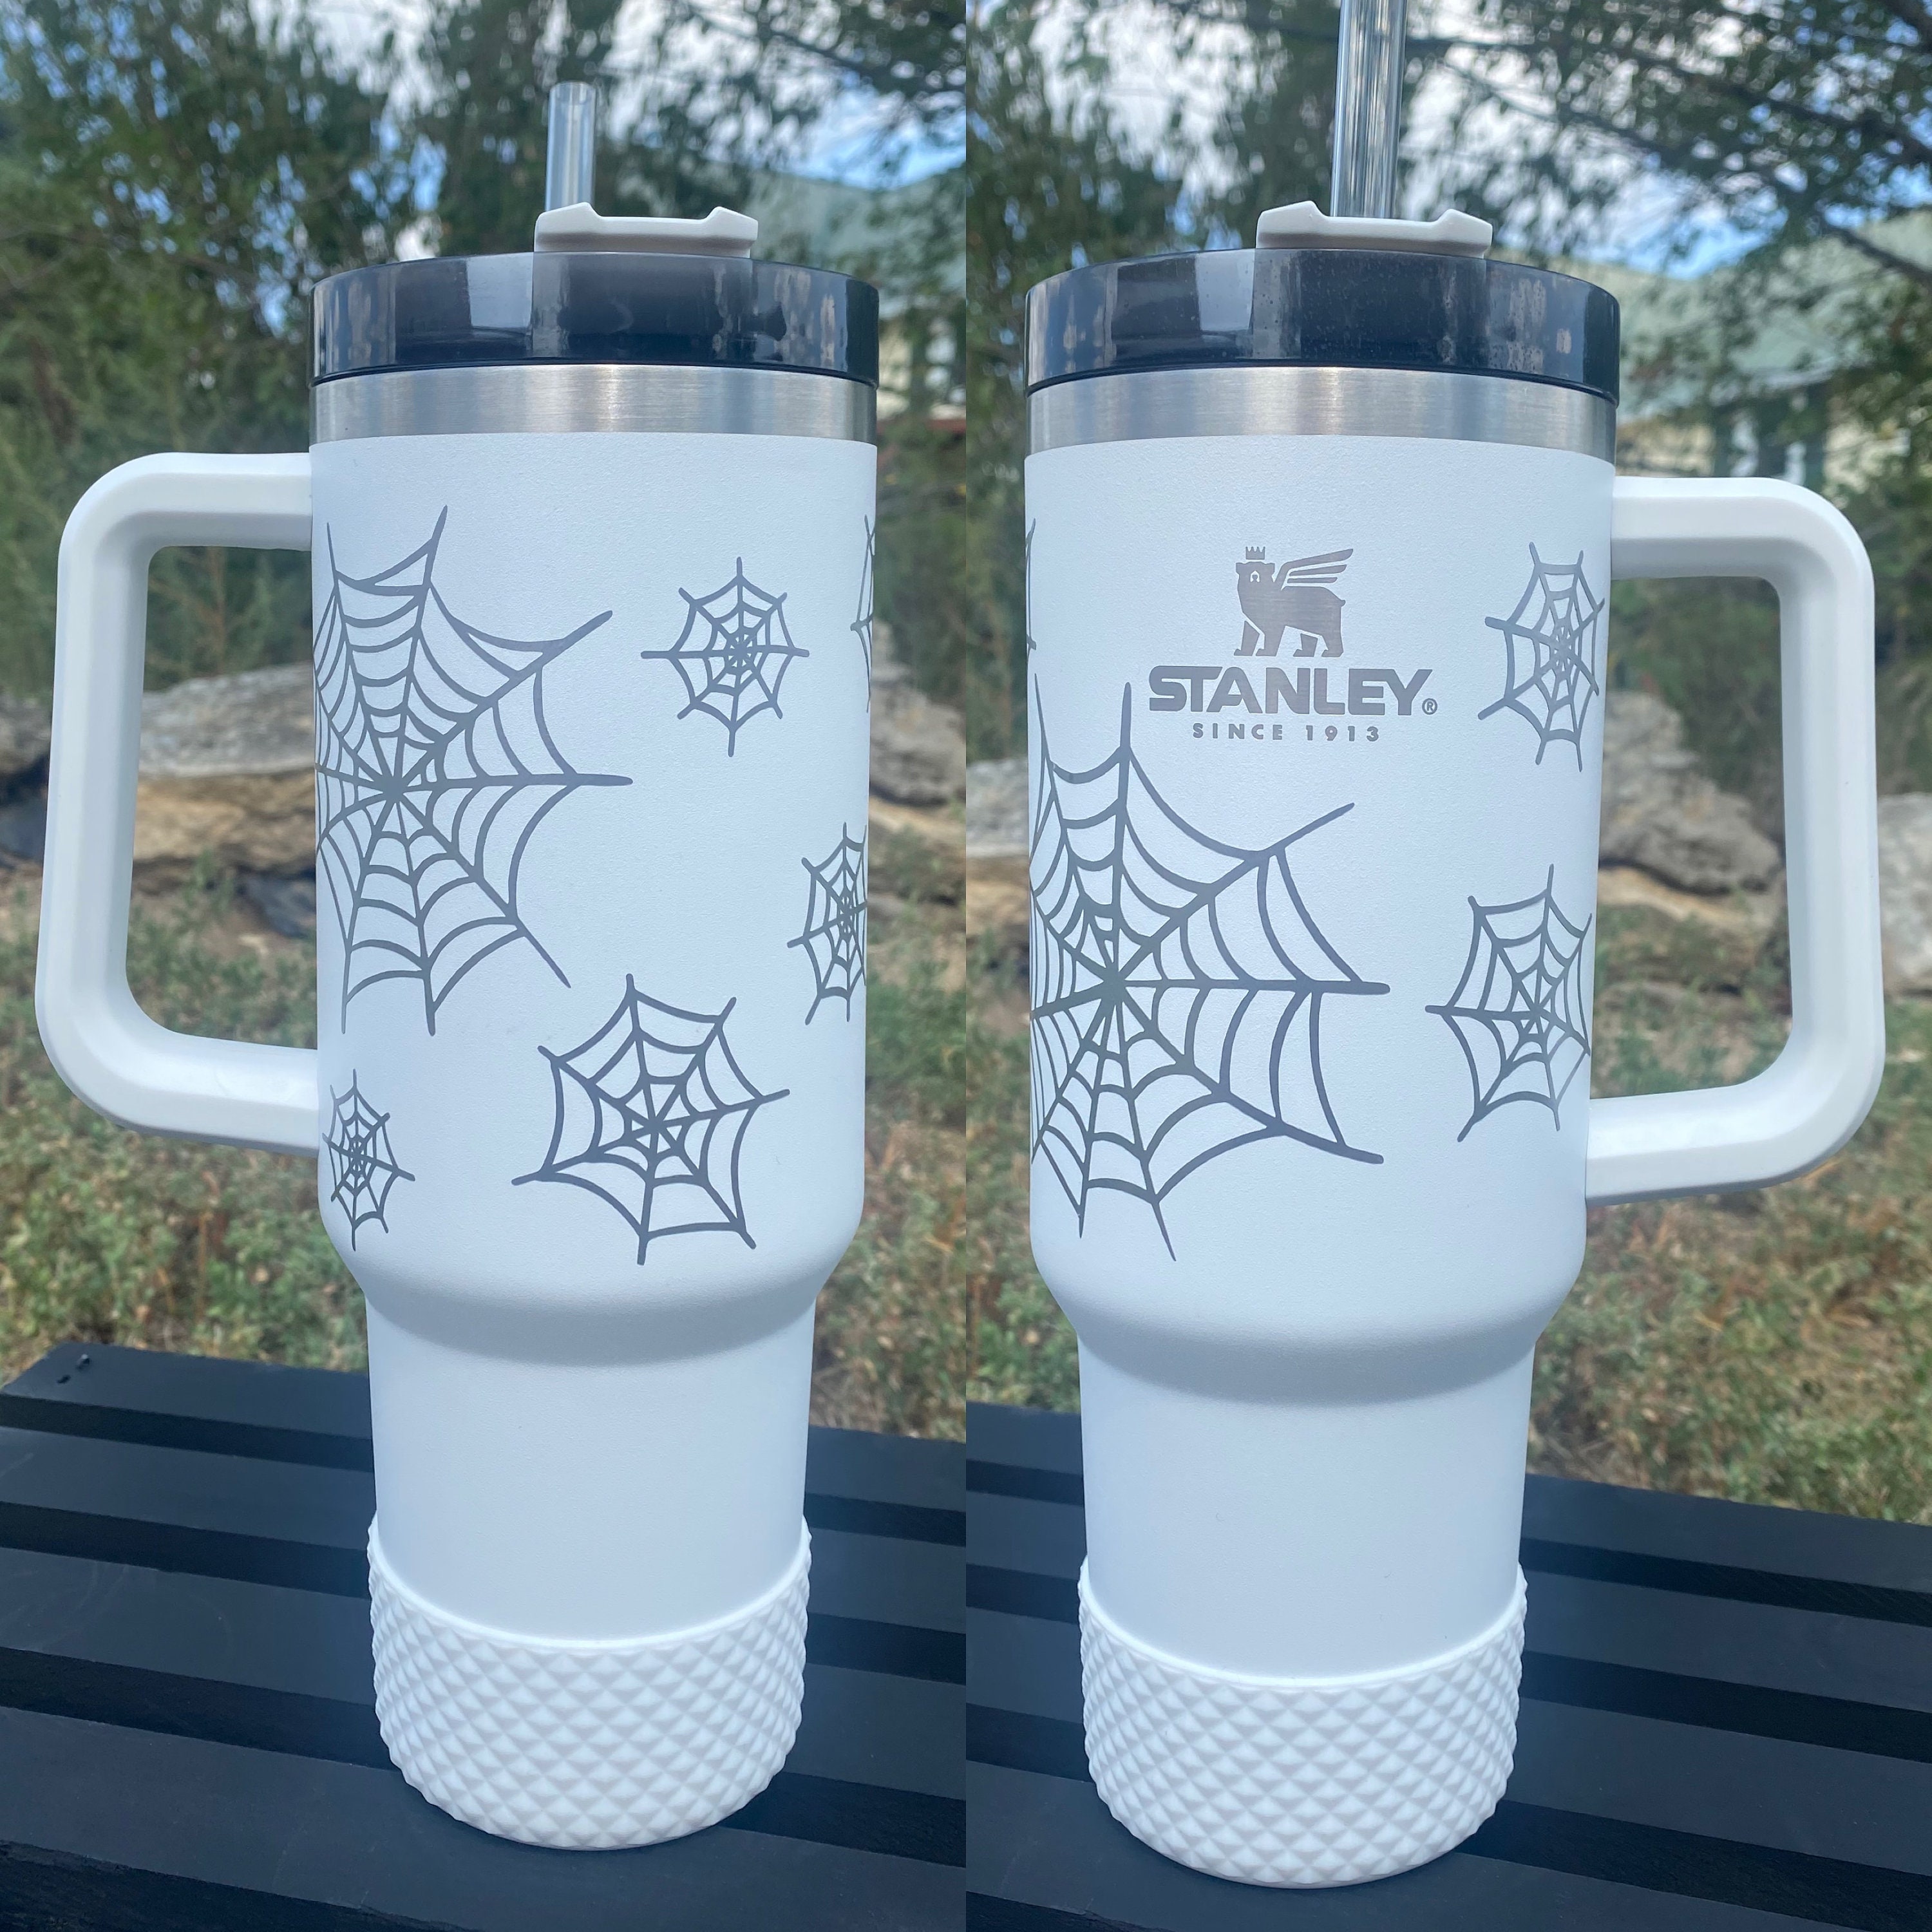 name decal for stanley cup without cricut｜TikTok Search